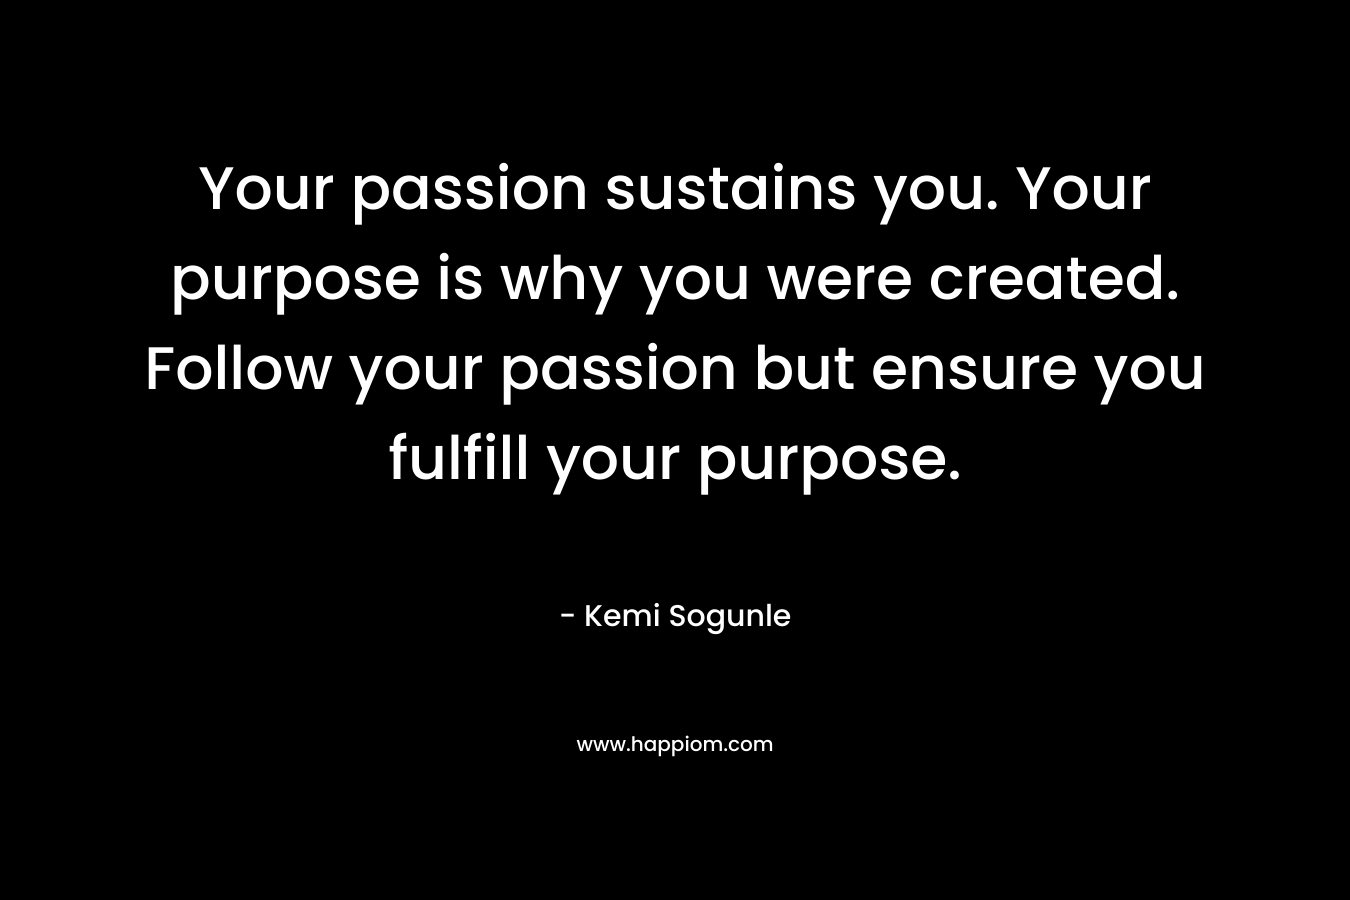 Your passion sustains you. Your purpose is why you were created. Follow your passion but ensure you fulfill your purpose.